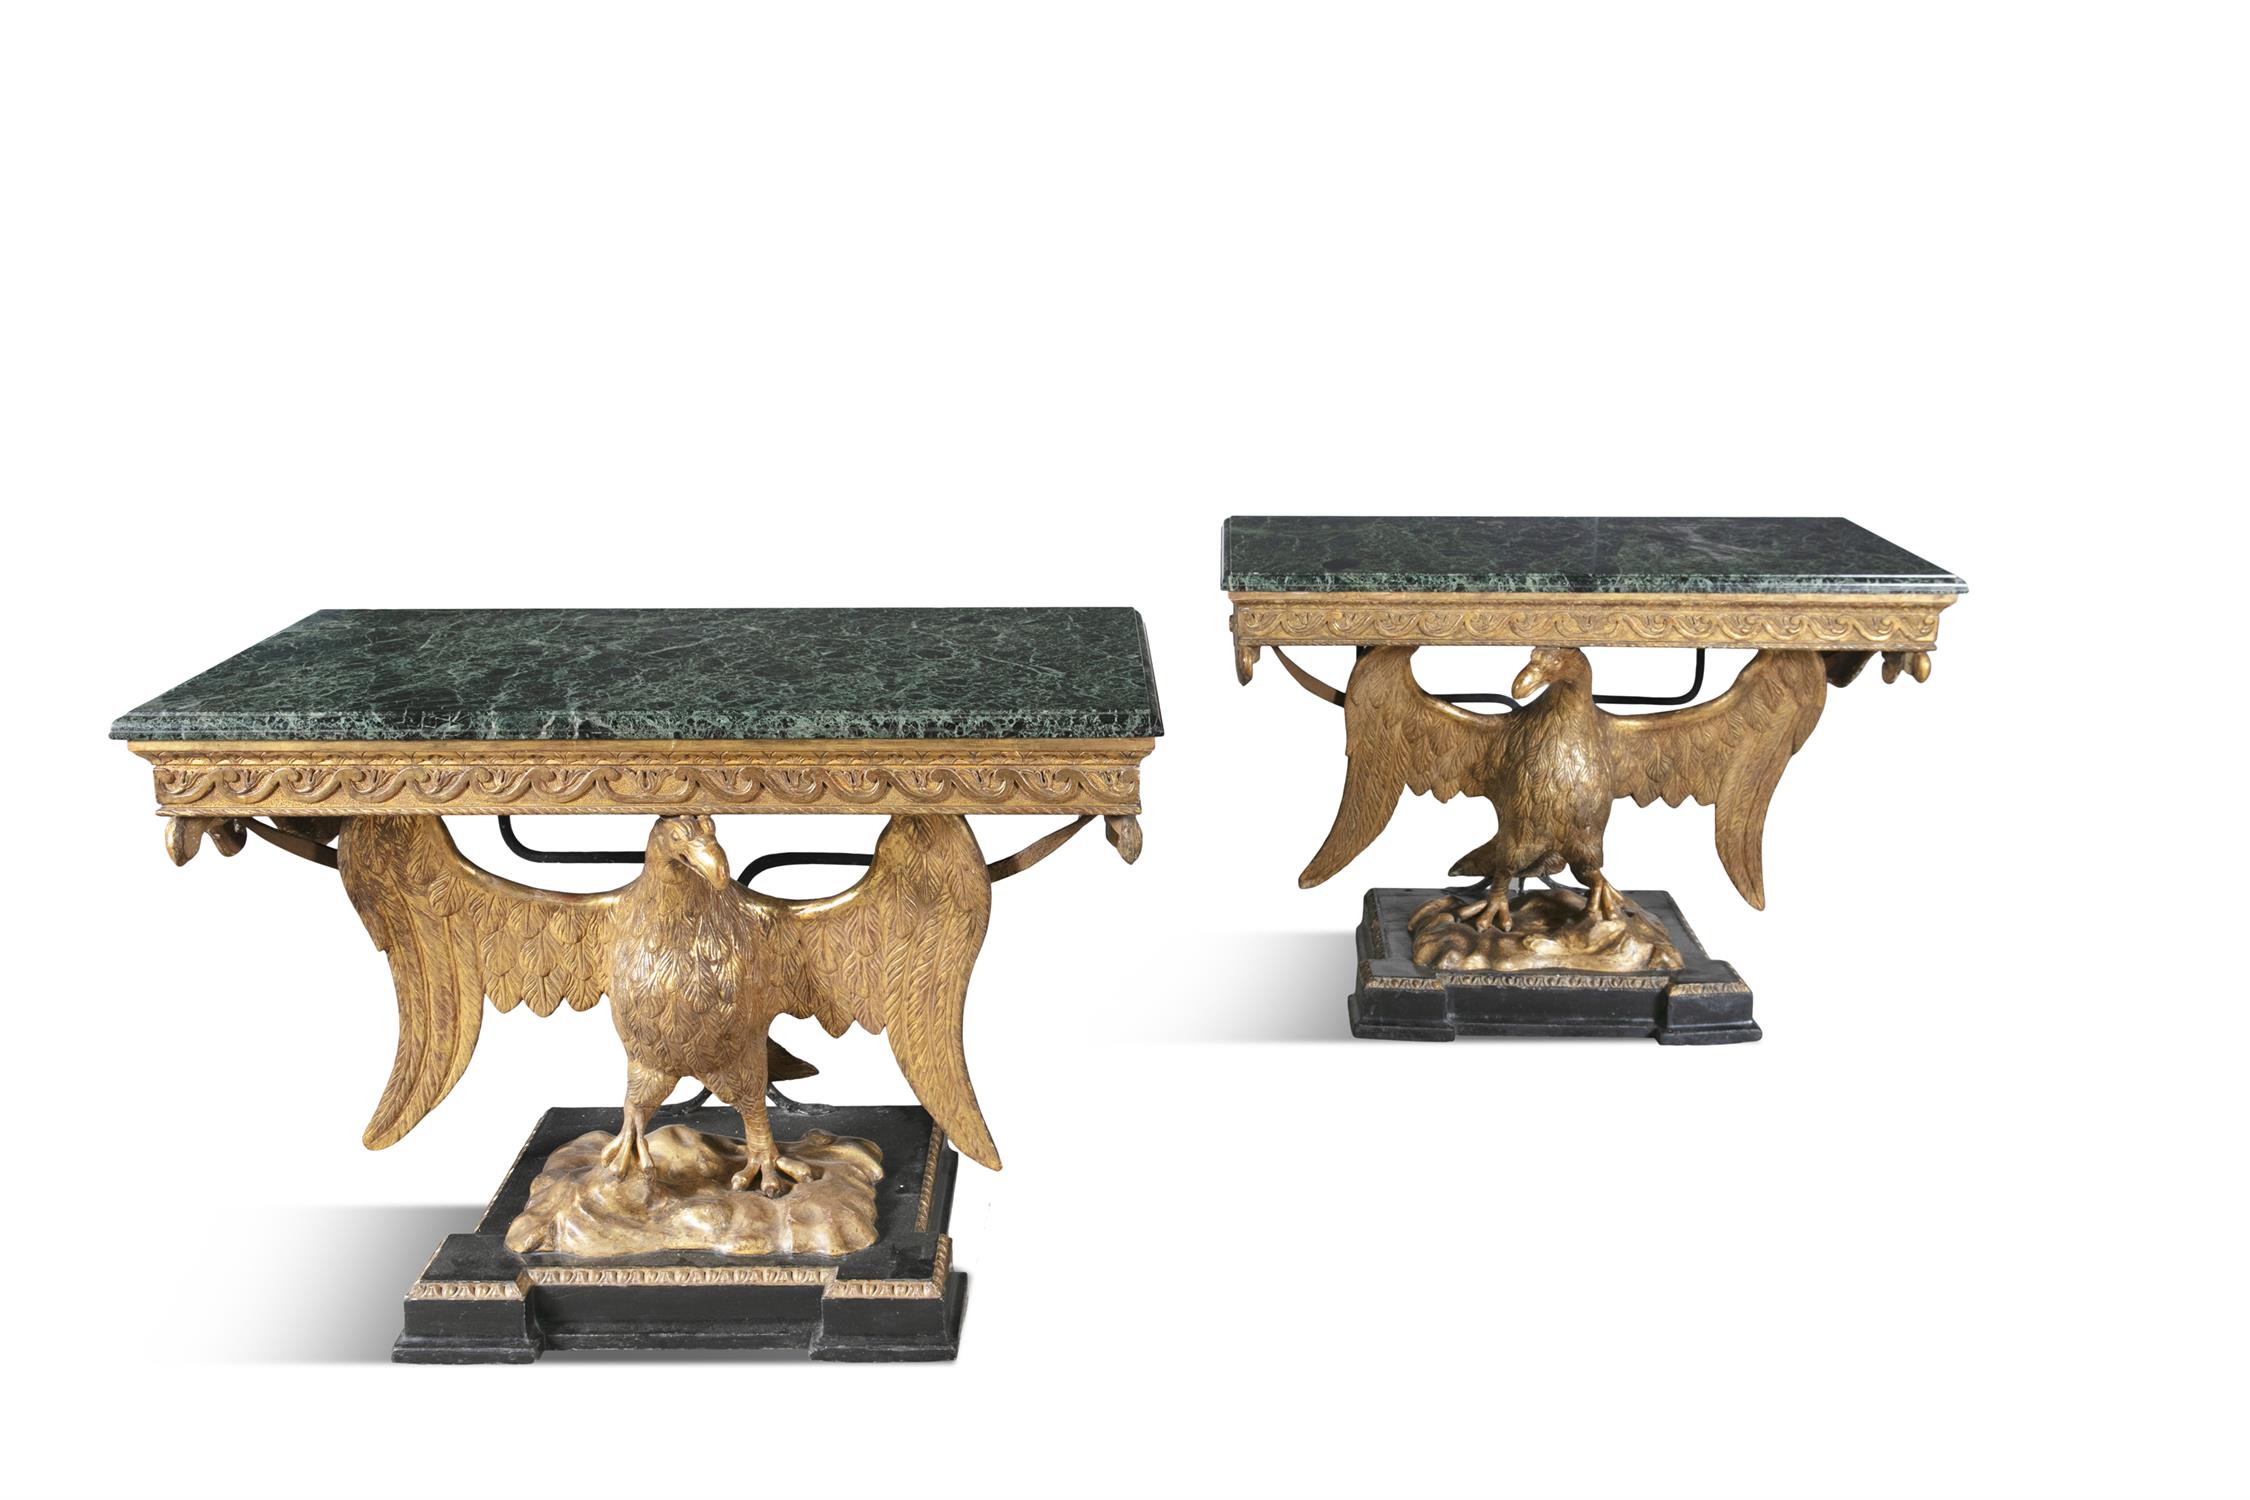 A PAIR OF 19TH CENTURY GEORGE III STYLE GILTWOOD CONSOLE TABLES, in the manner of William Kent,